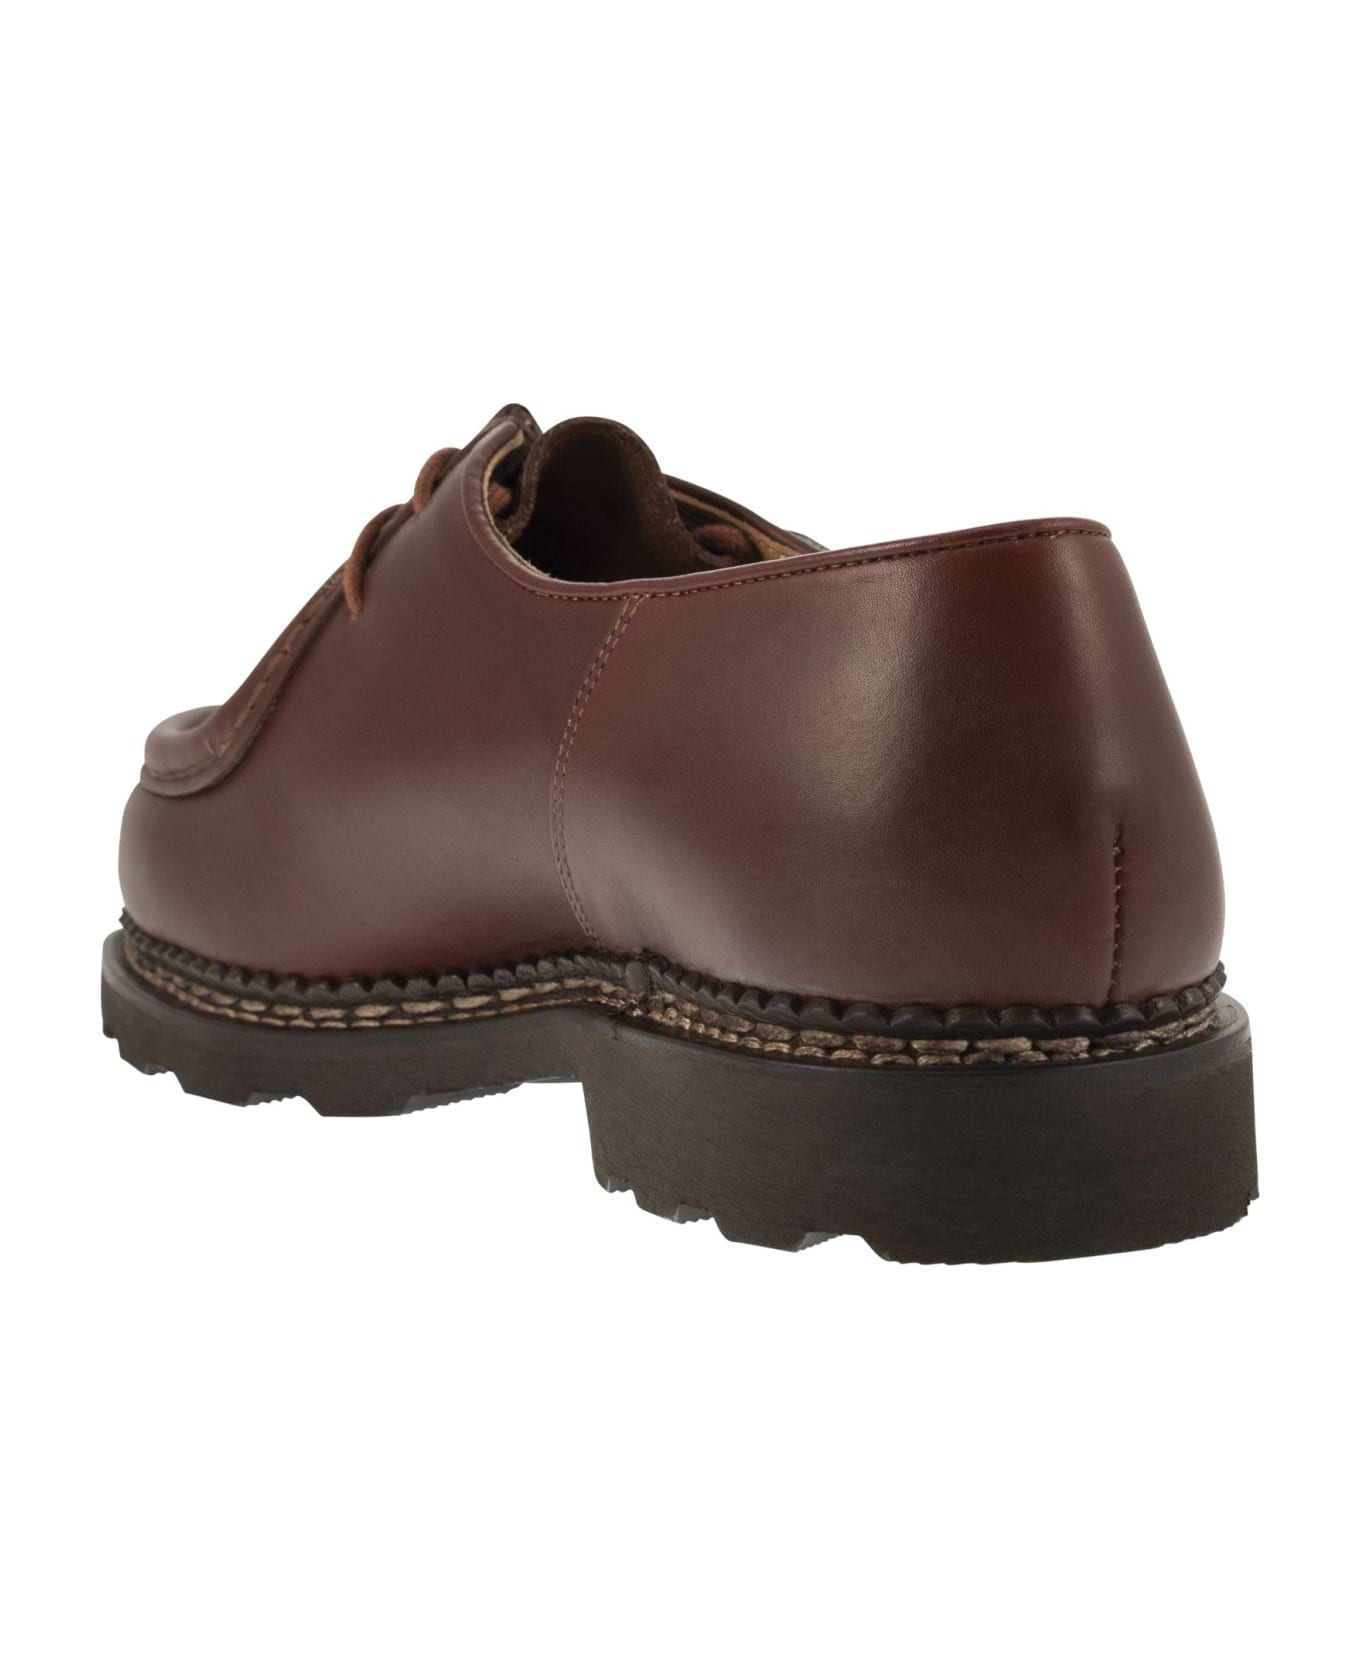 Paraboot Michael - Leather Derby - Consider this new pair of sneakers if